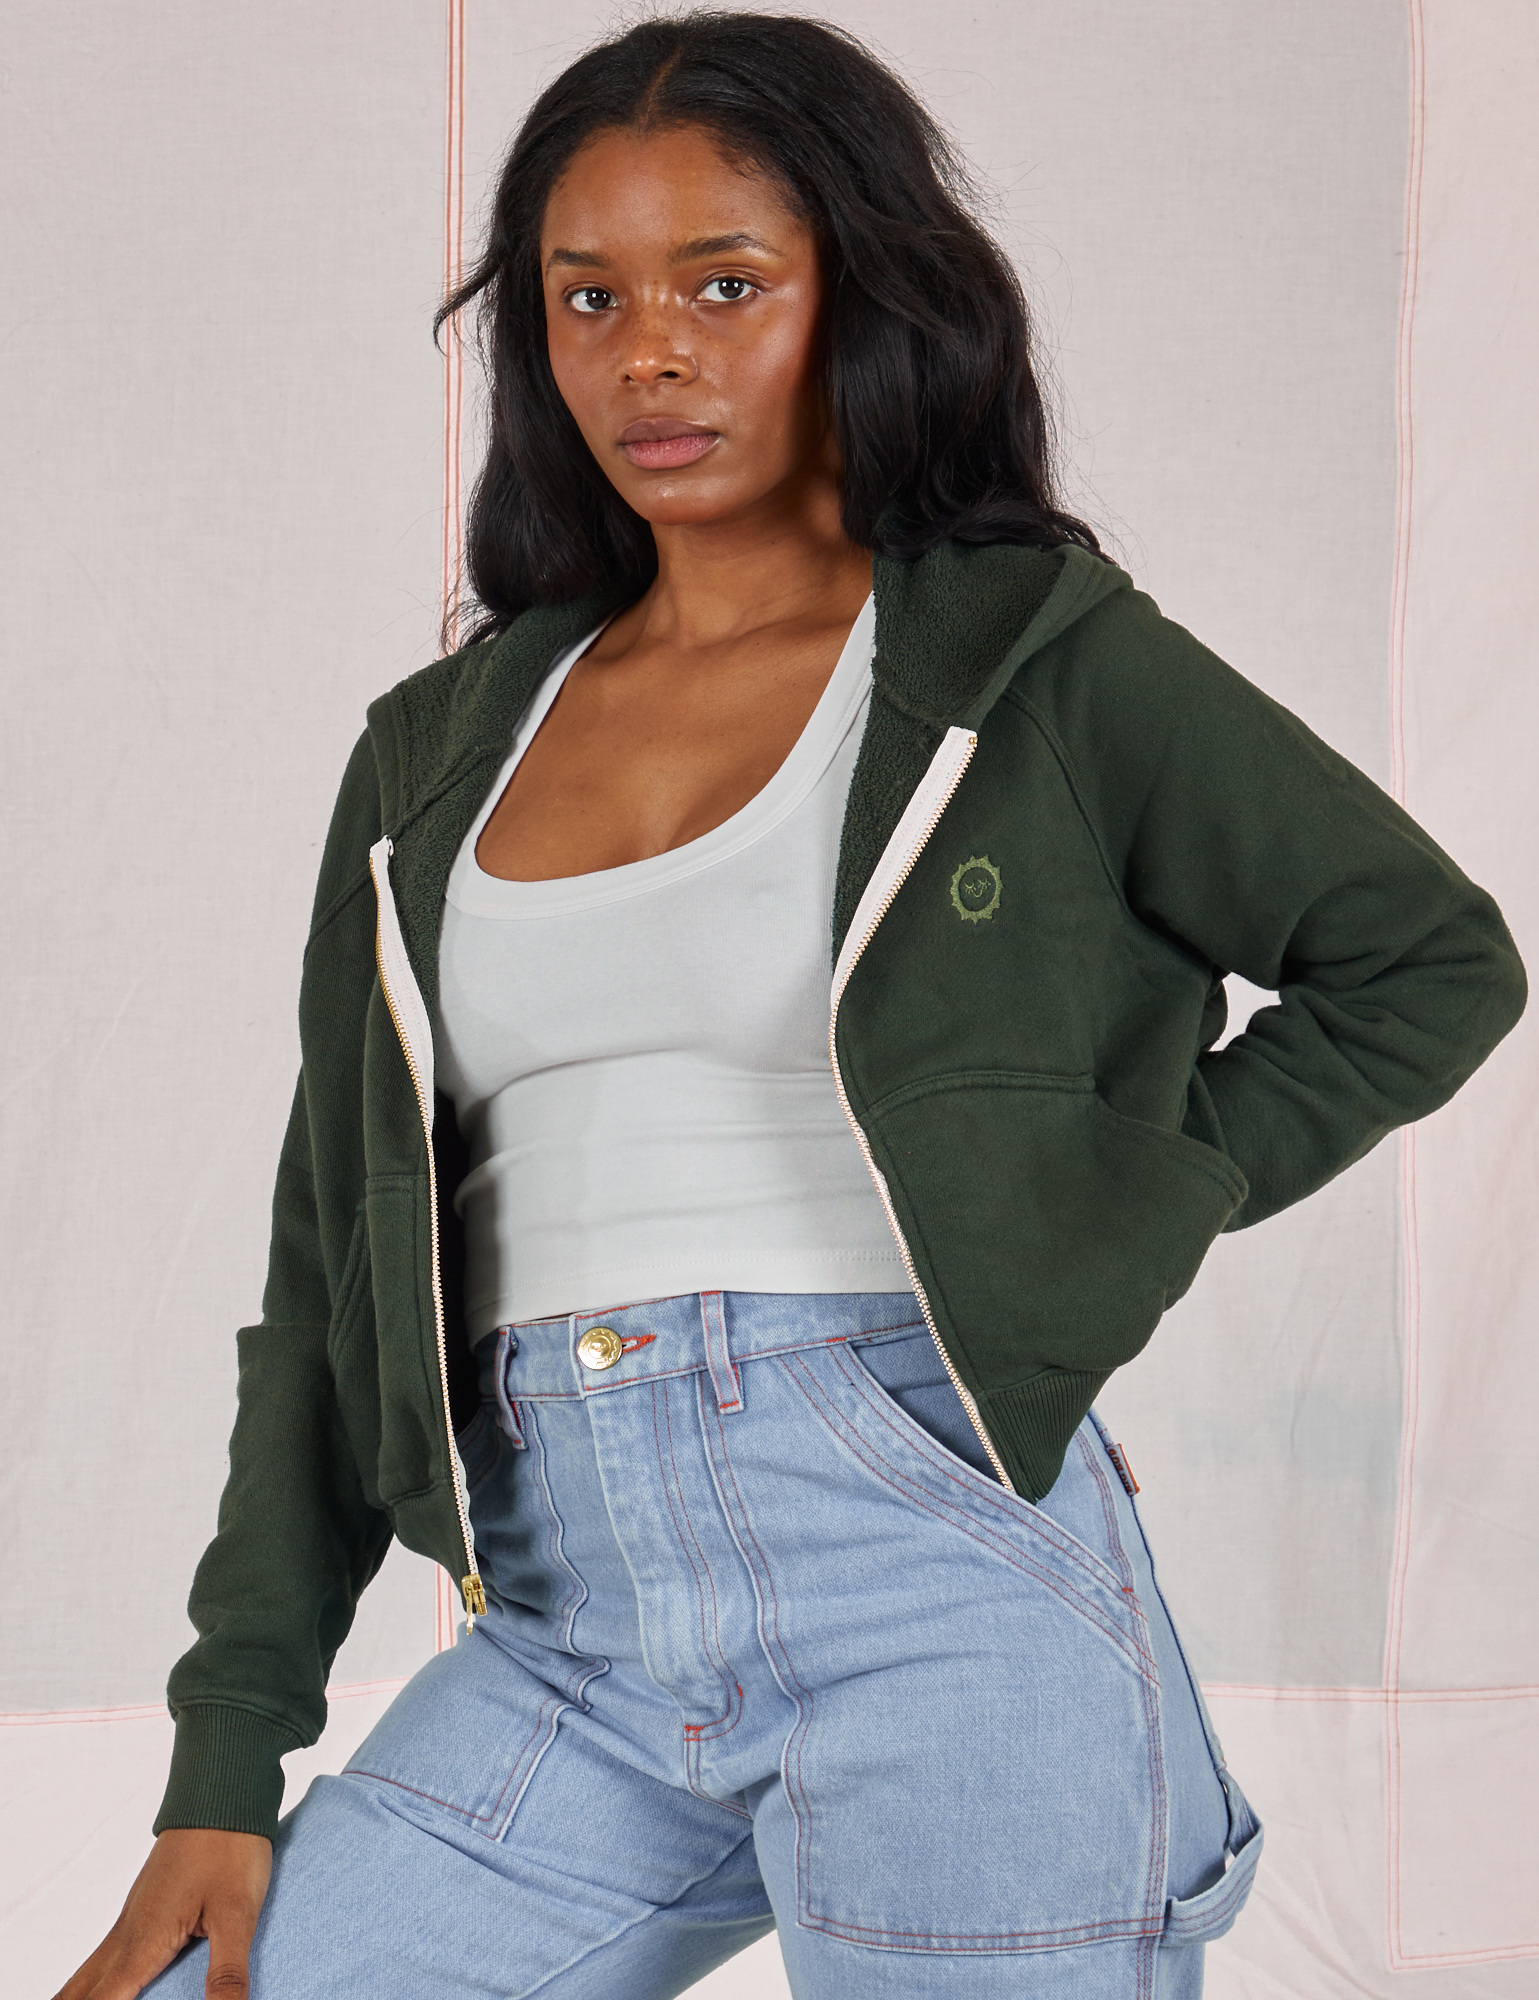 Kandia is 5&#39;3&quot; and wearing P Cropped Zip Hoodie in Swamp Green paired with a vintage off-white Cropped Tank underneath and light wash Carpenter Jeans